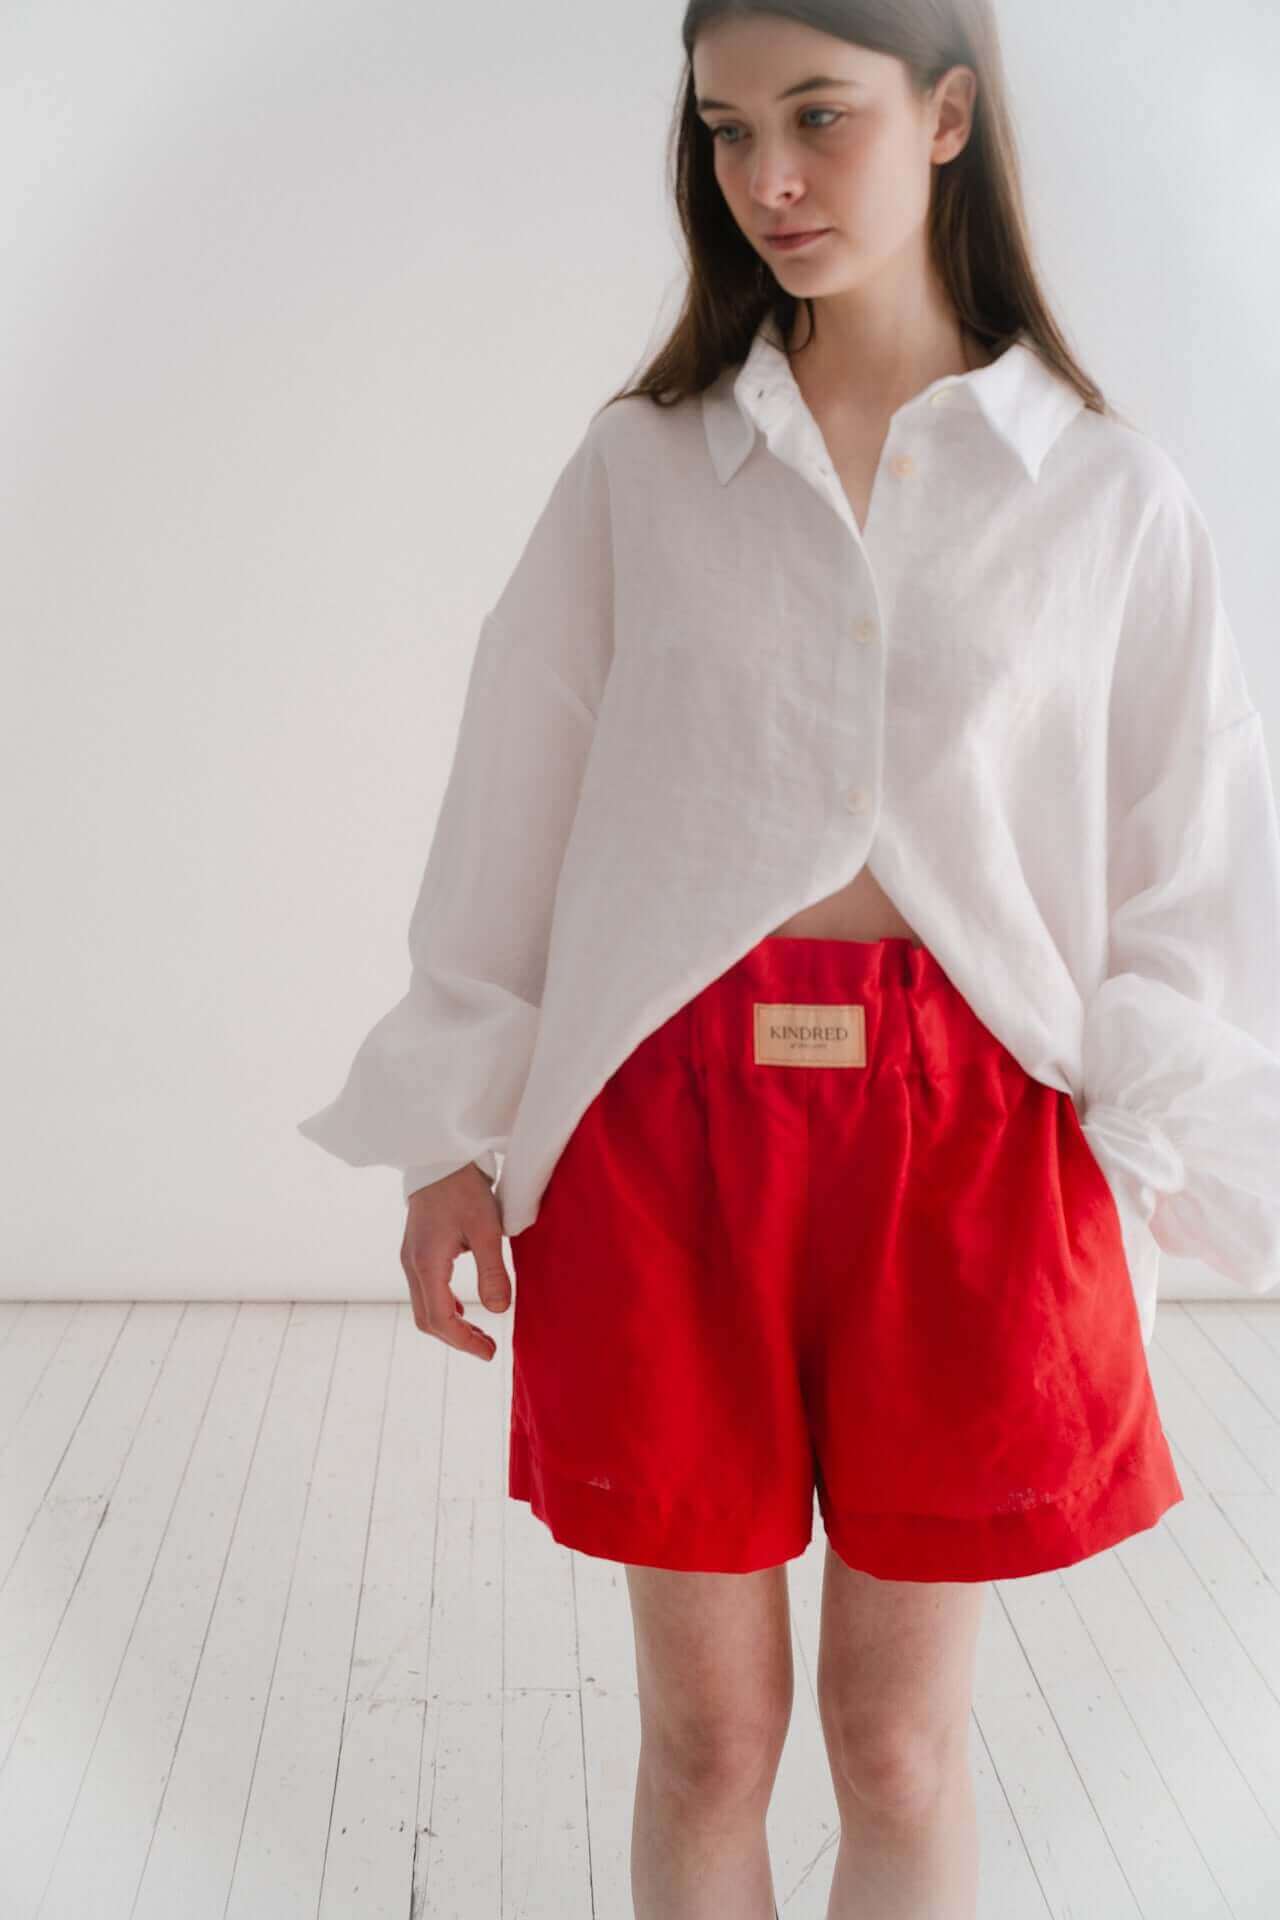 POPPY SHORTS | A simple yet bold statement in our Poppy shorts. For those days that you don’t want to think too much, but feel considered in your outfit choice. Pair with our Cadhla shirt or your favourite knitwear for an effortless summer look.